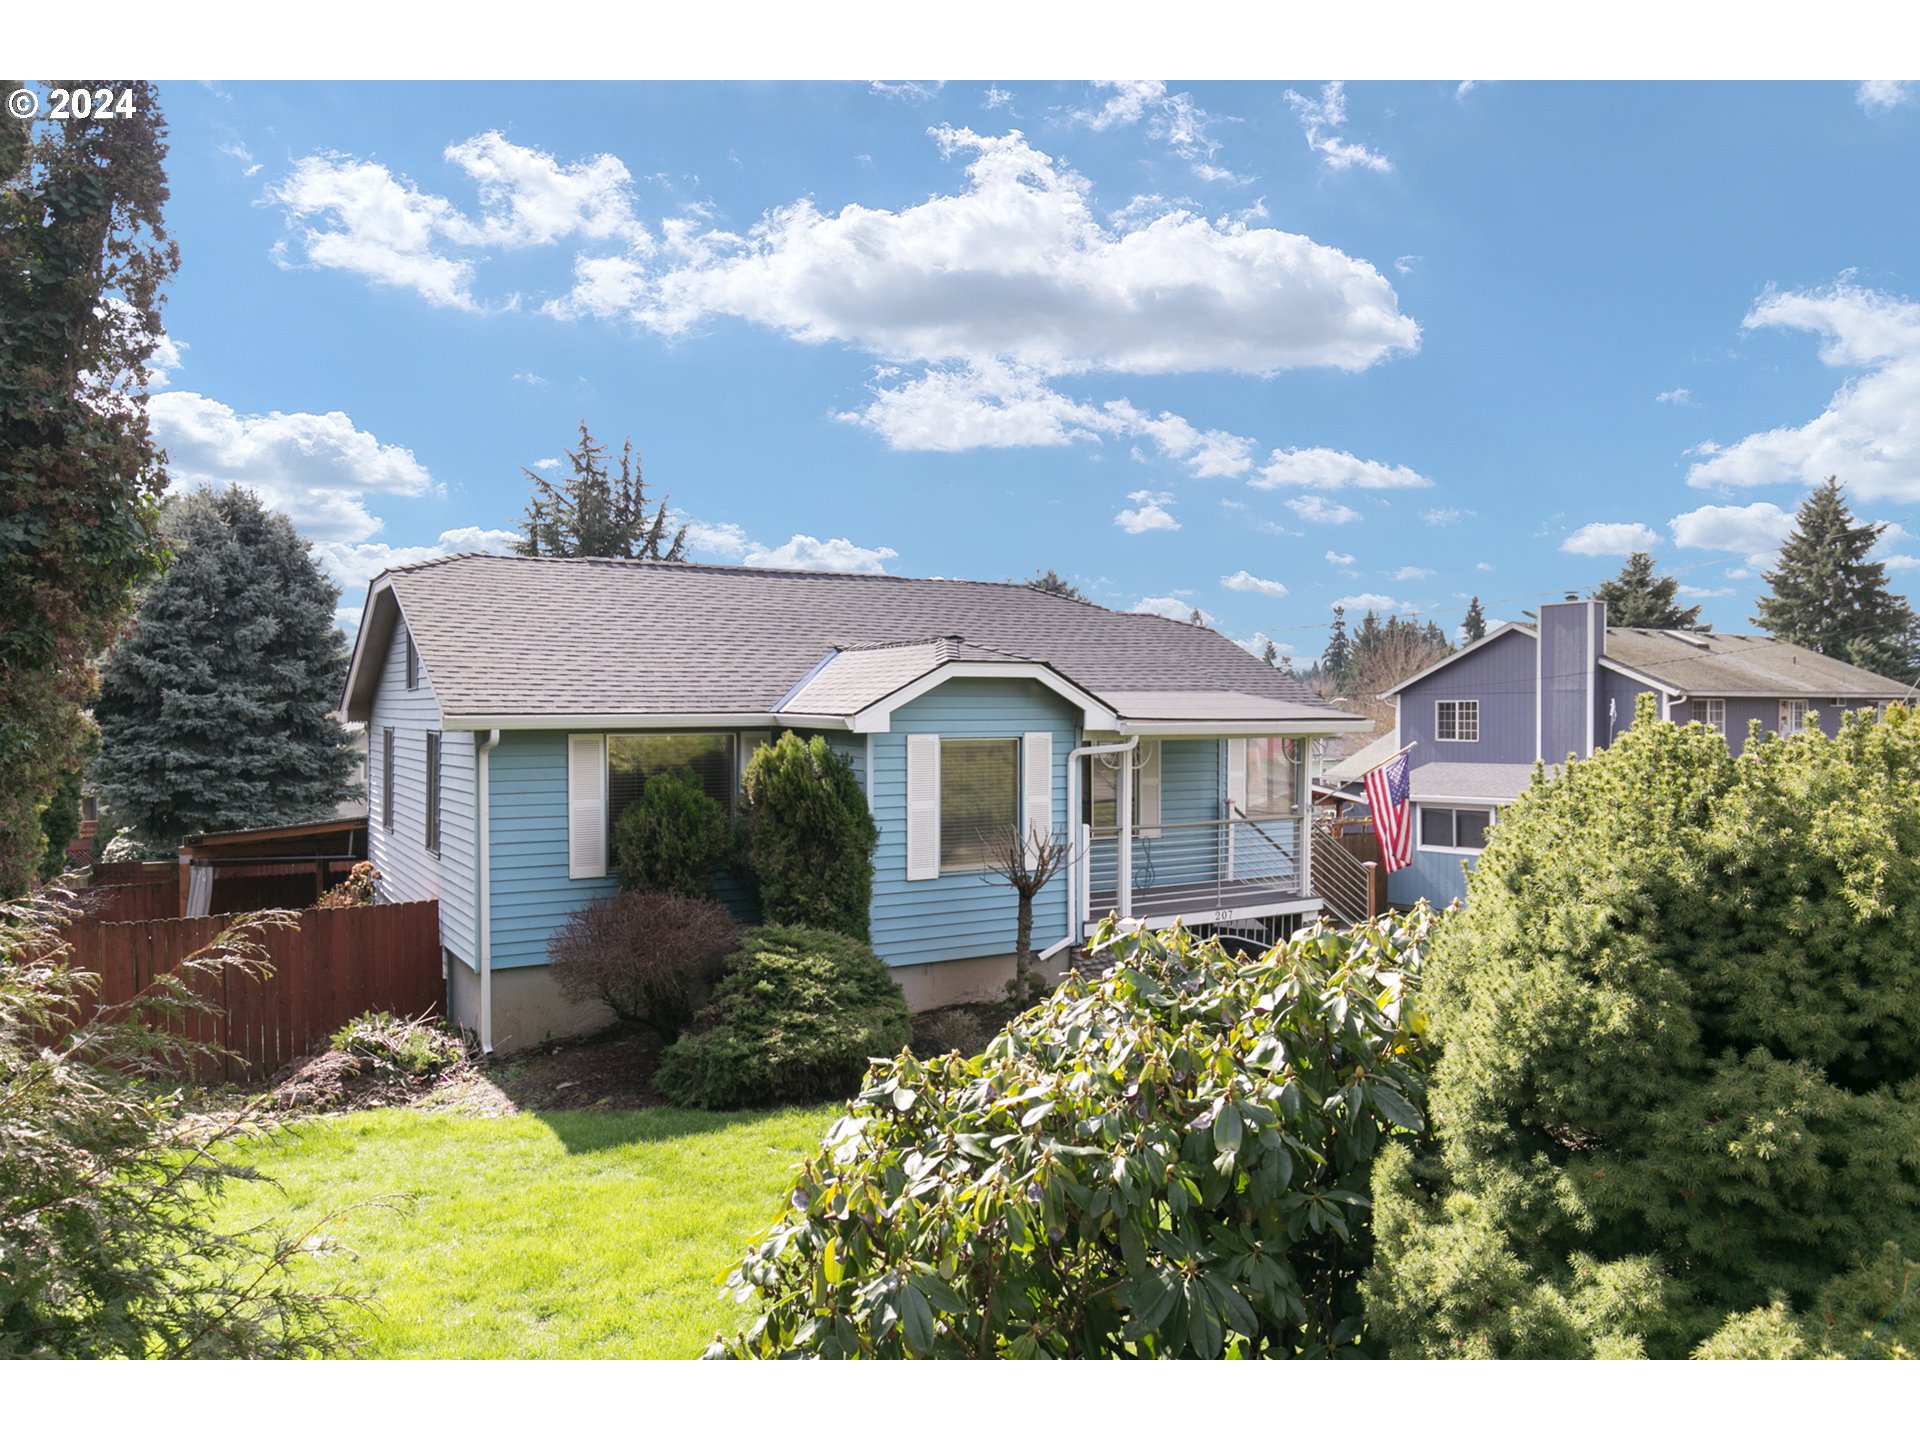 207 NW 99th St, Vancouver, WA 98665